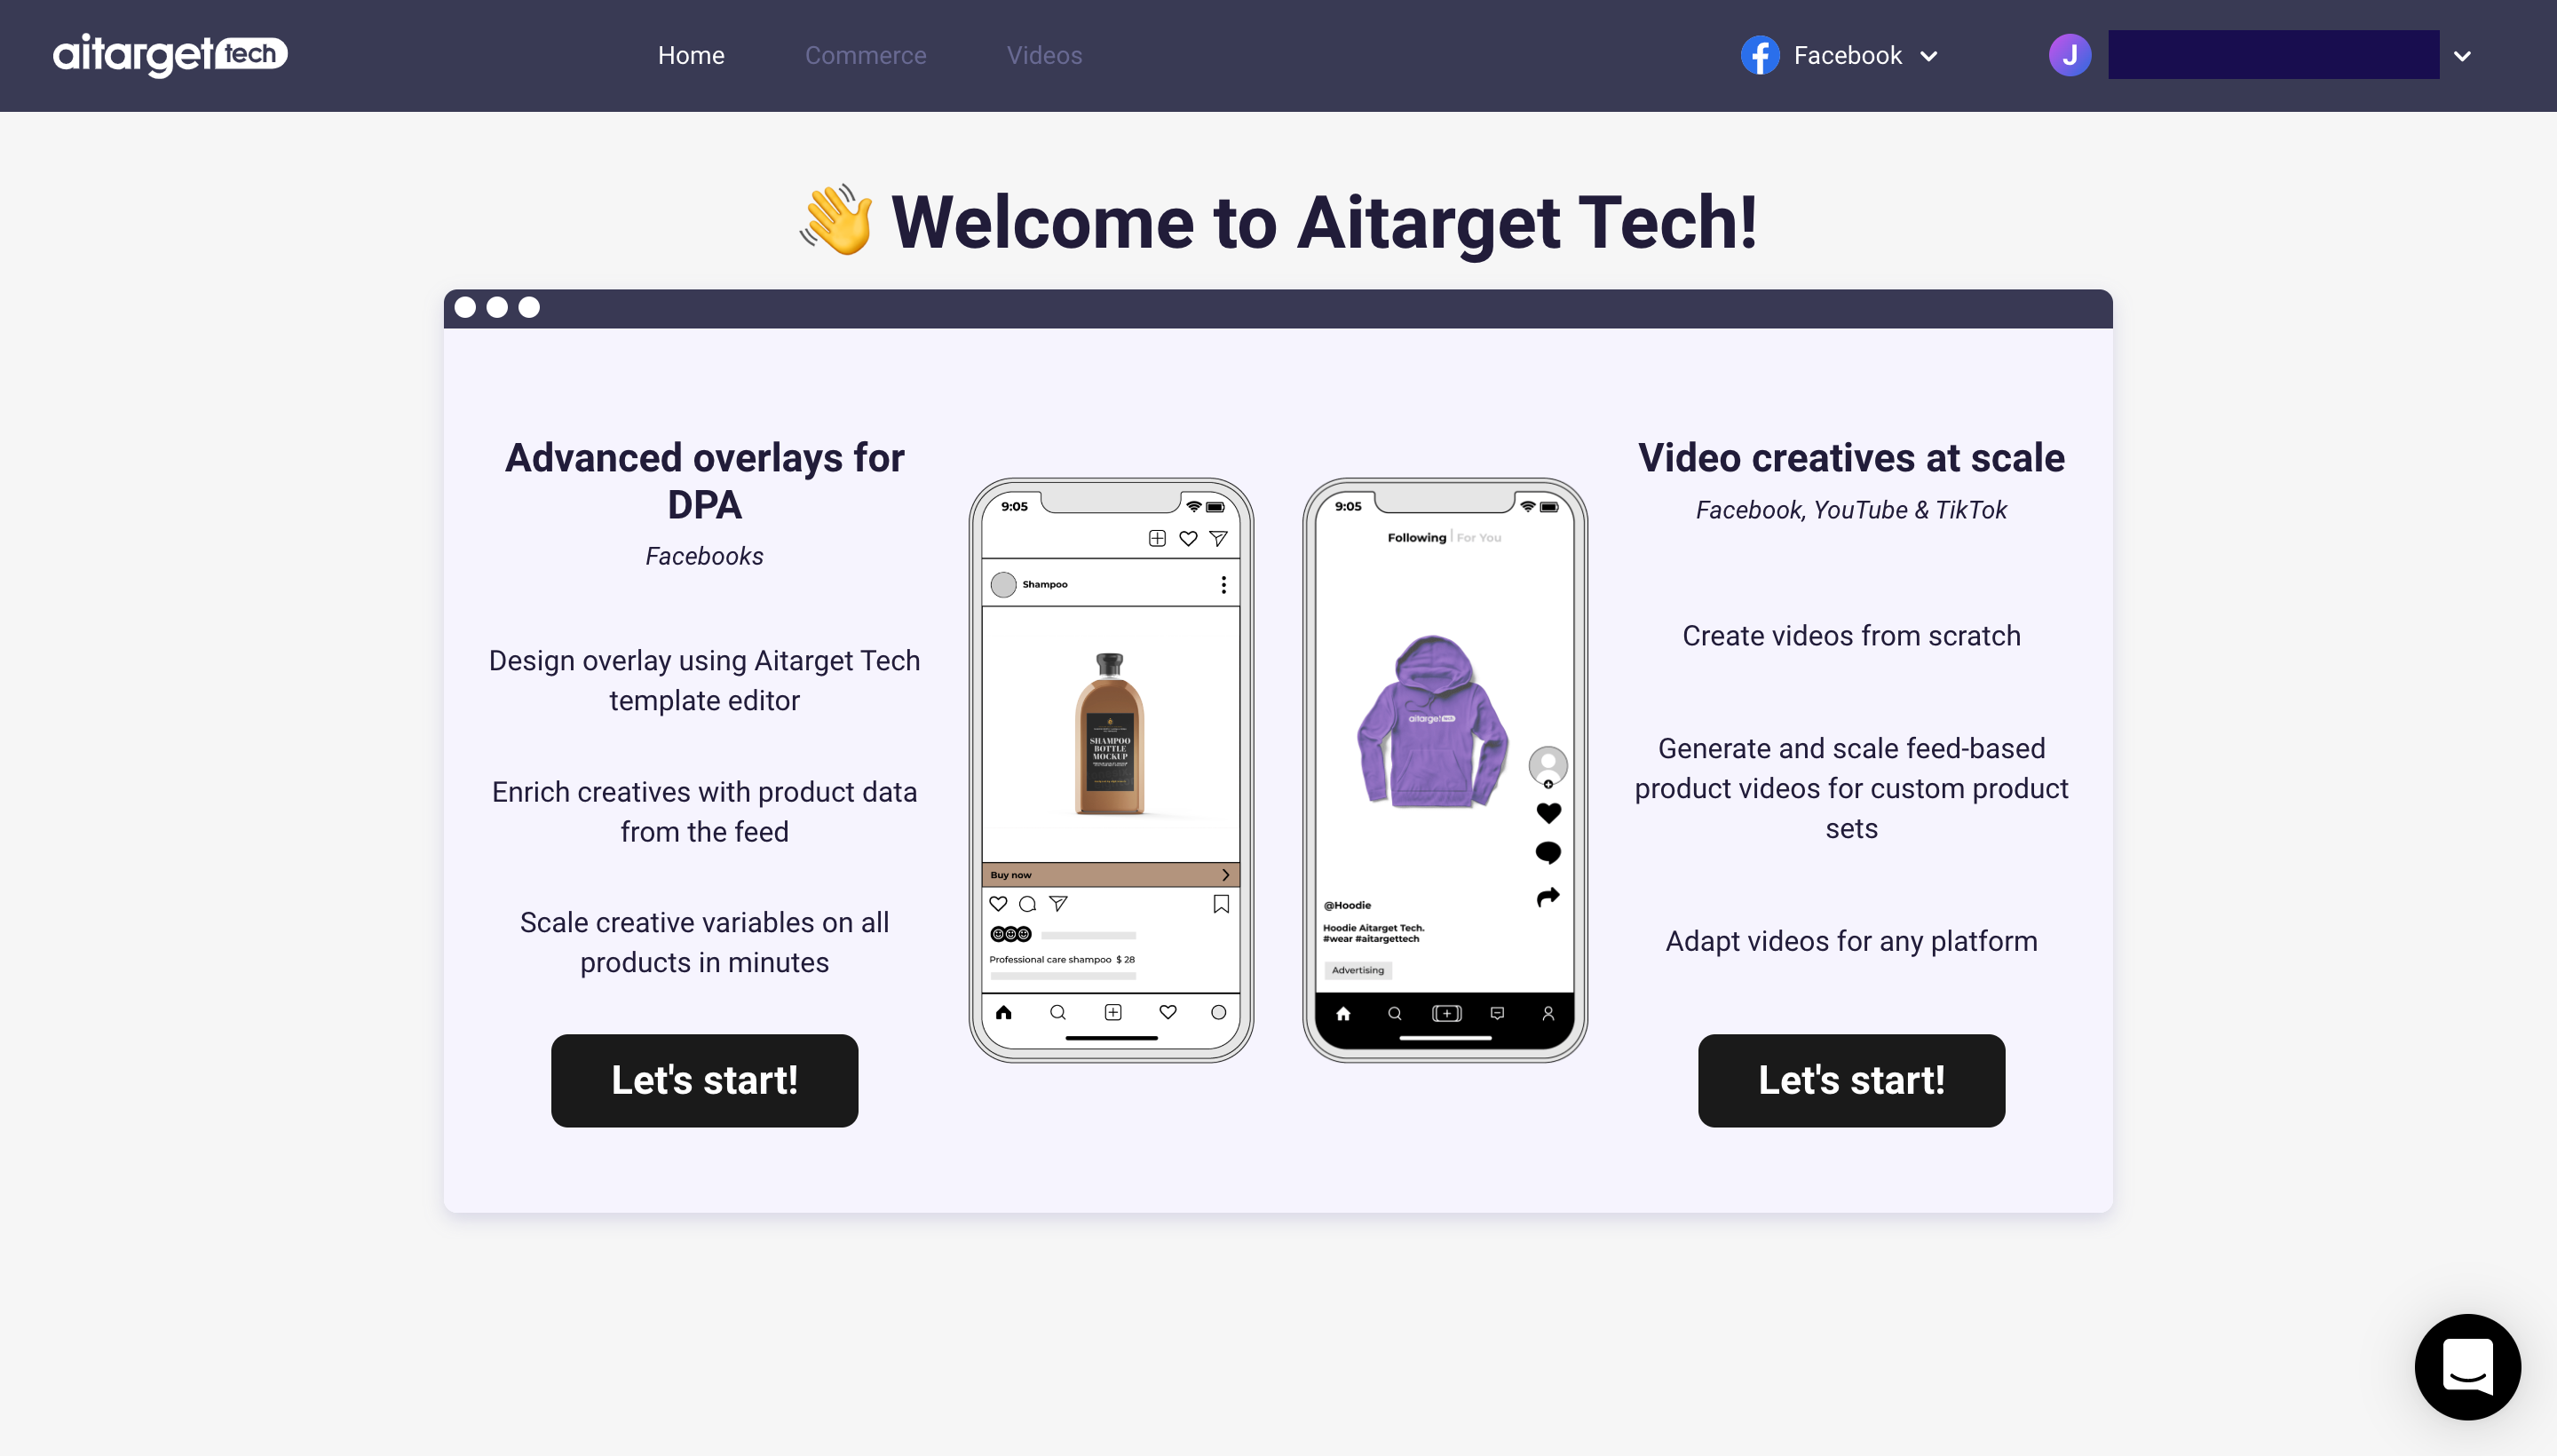 Aitarget Tech Home Page